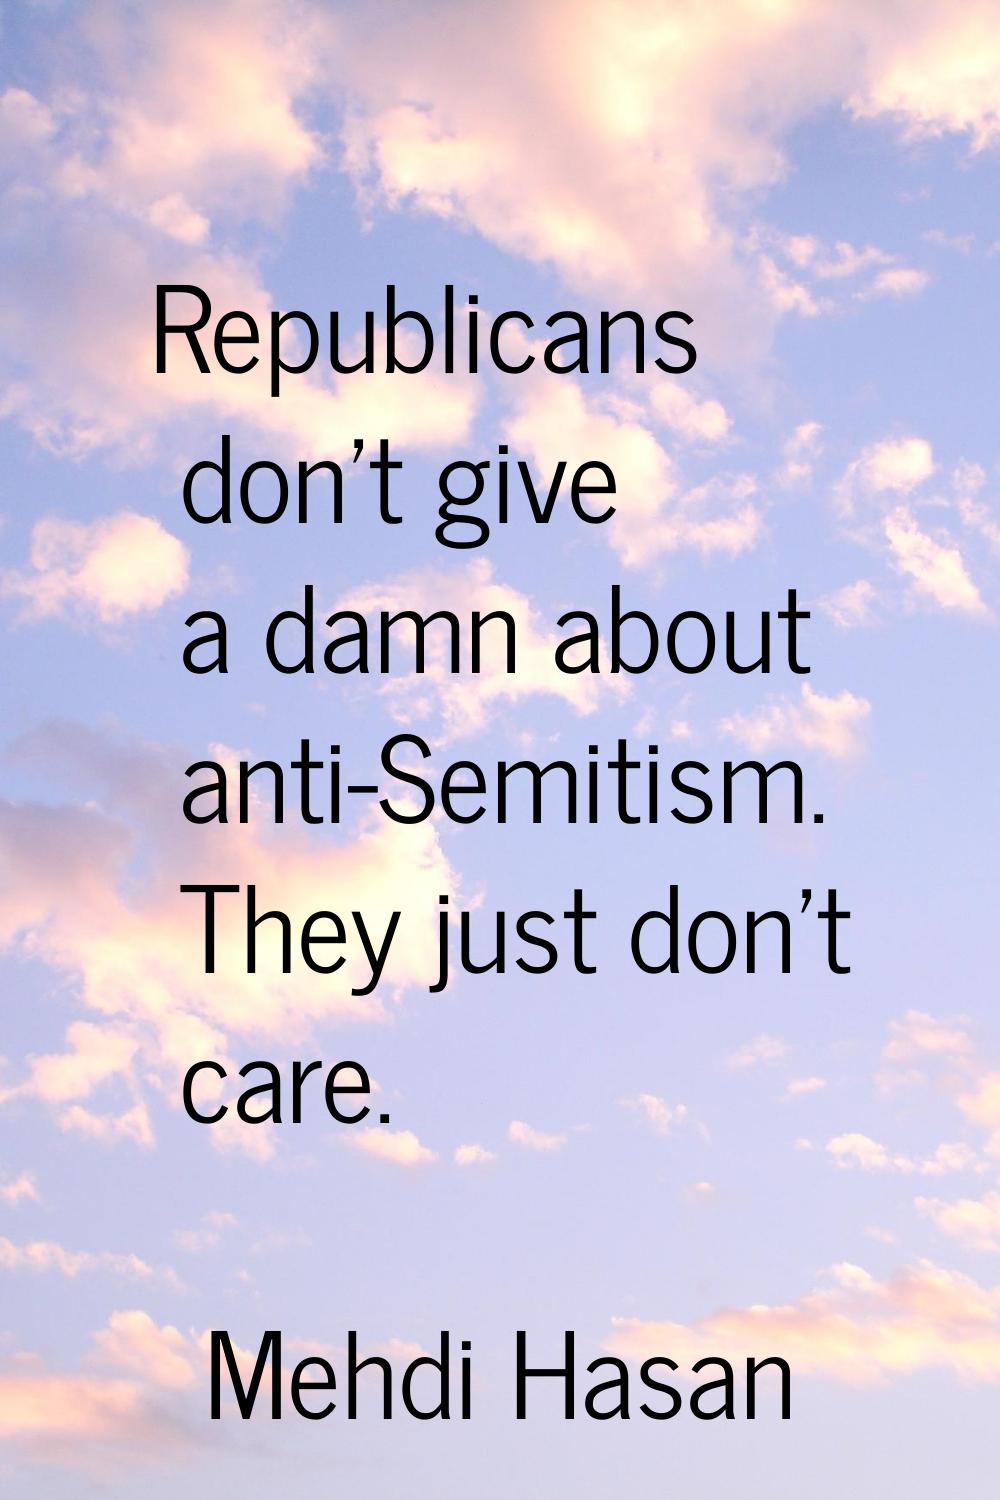 Republicans don't give a damn about anti-Semitism. They just don't care.